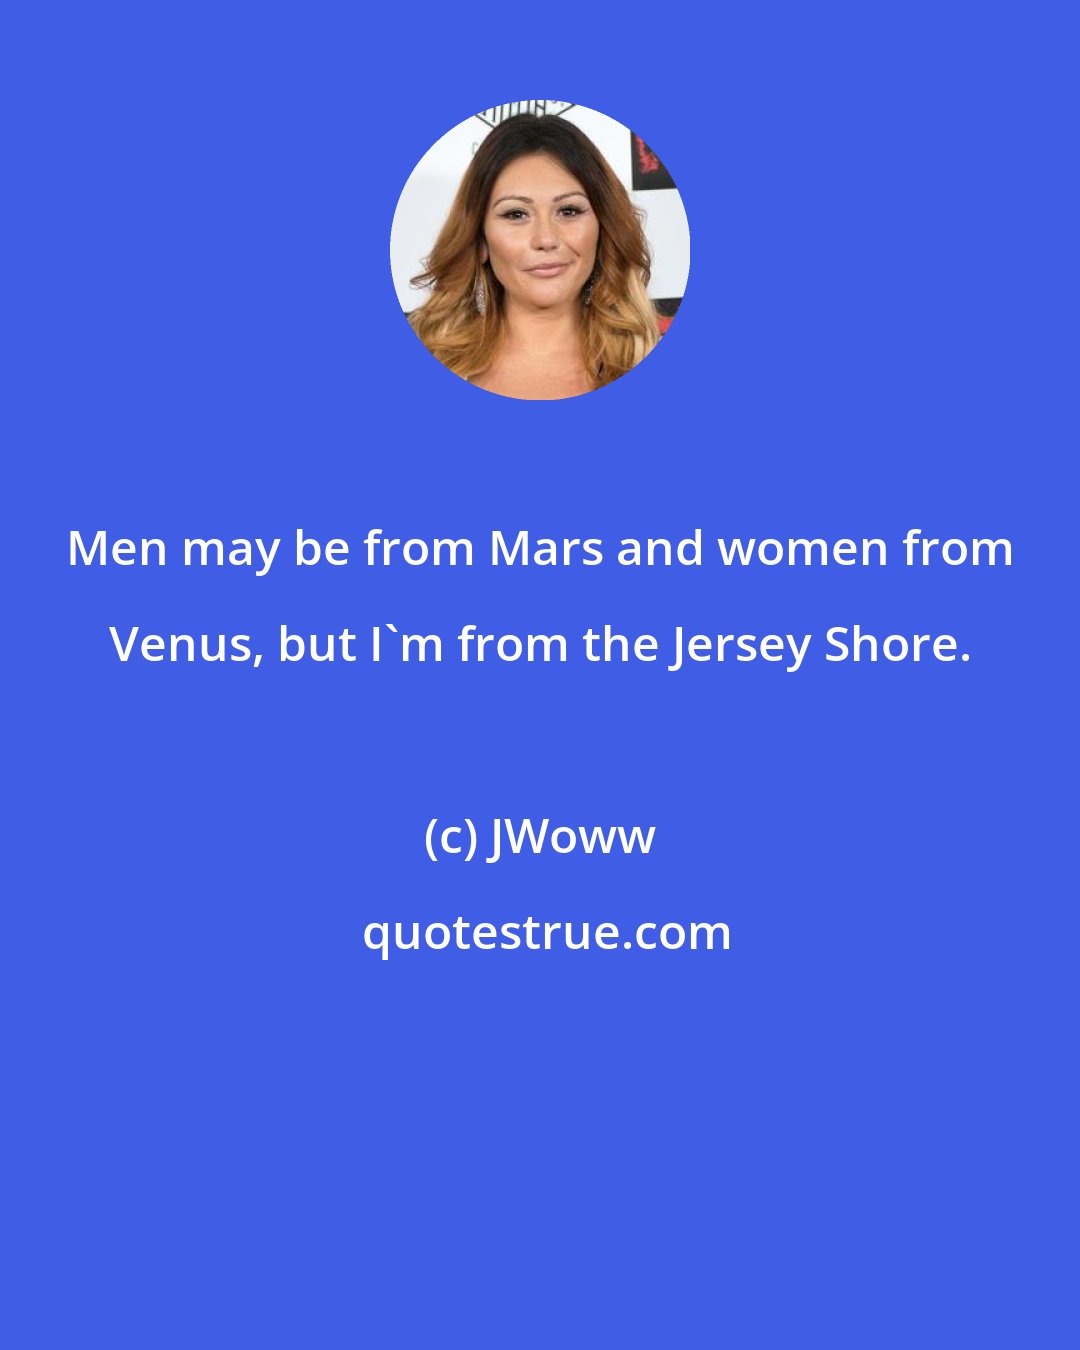 JWoww: Men may be from Mars and women from Venus, but I'm from the Jersey Shore.